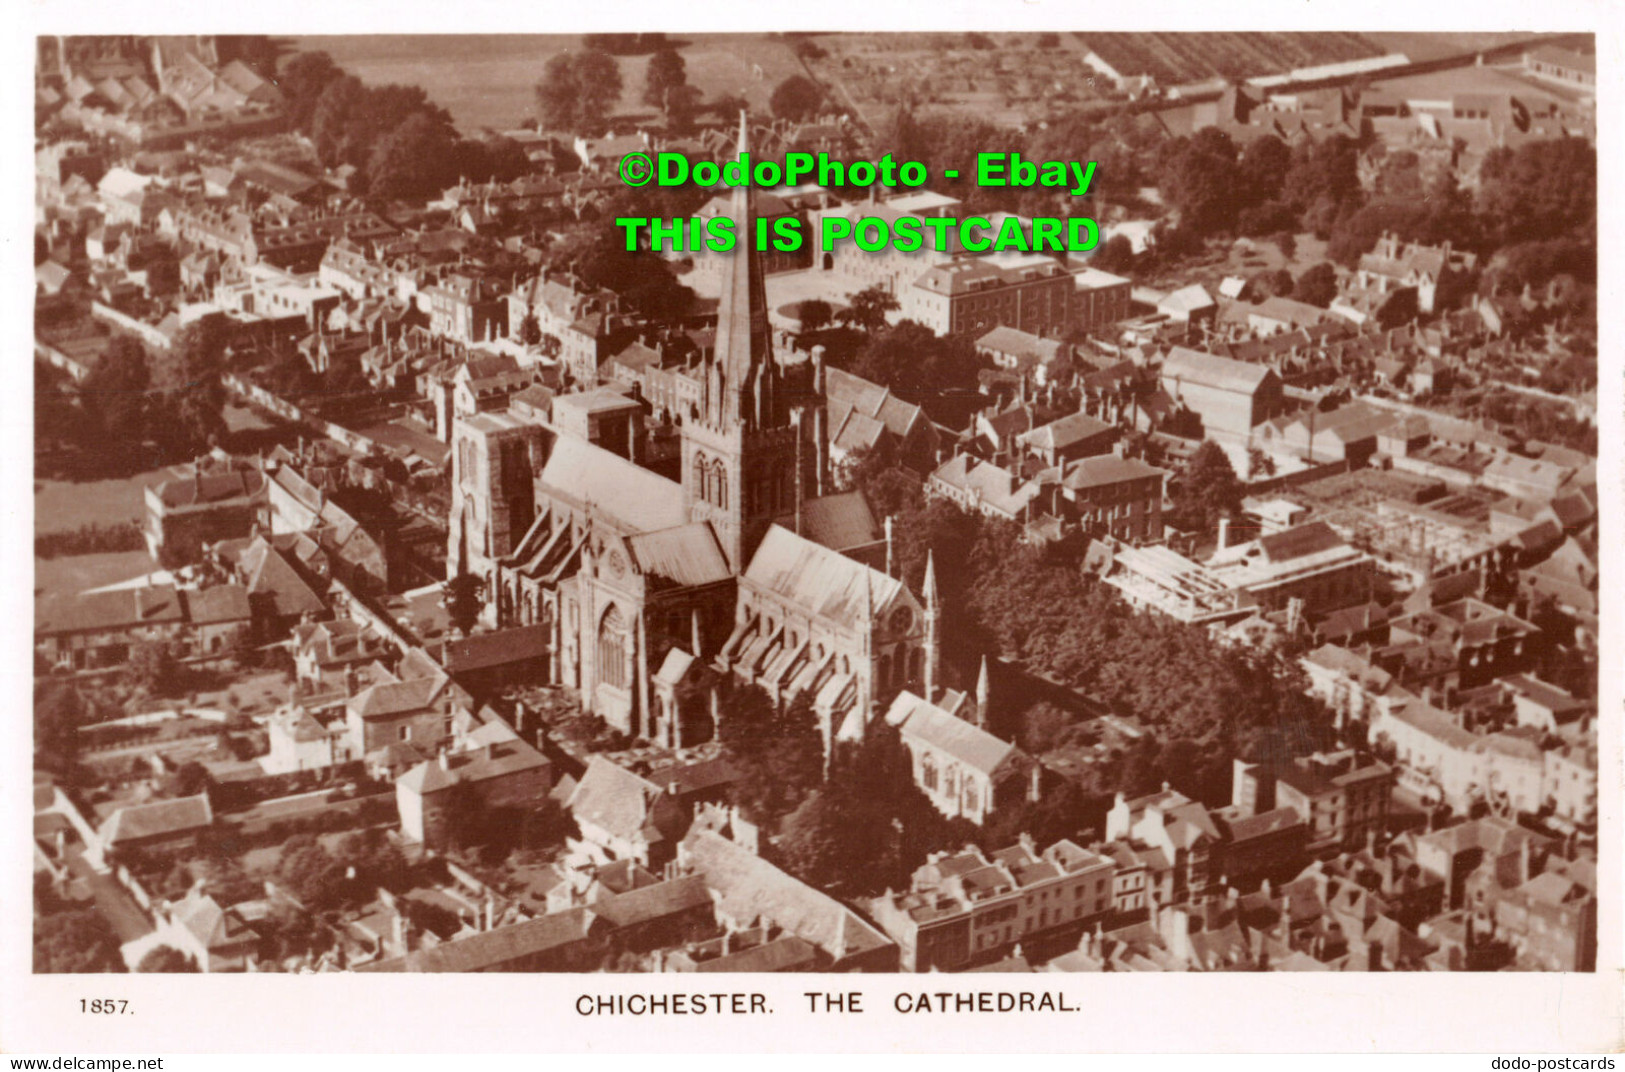 R392708 Chichester. The Cathedral. Aero Pictorial. Air Photograph. No. 1857 - Mundo